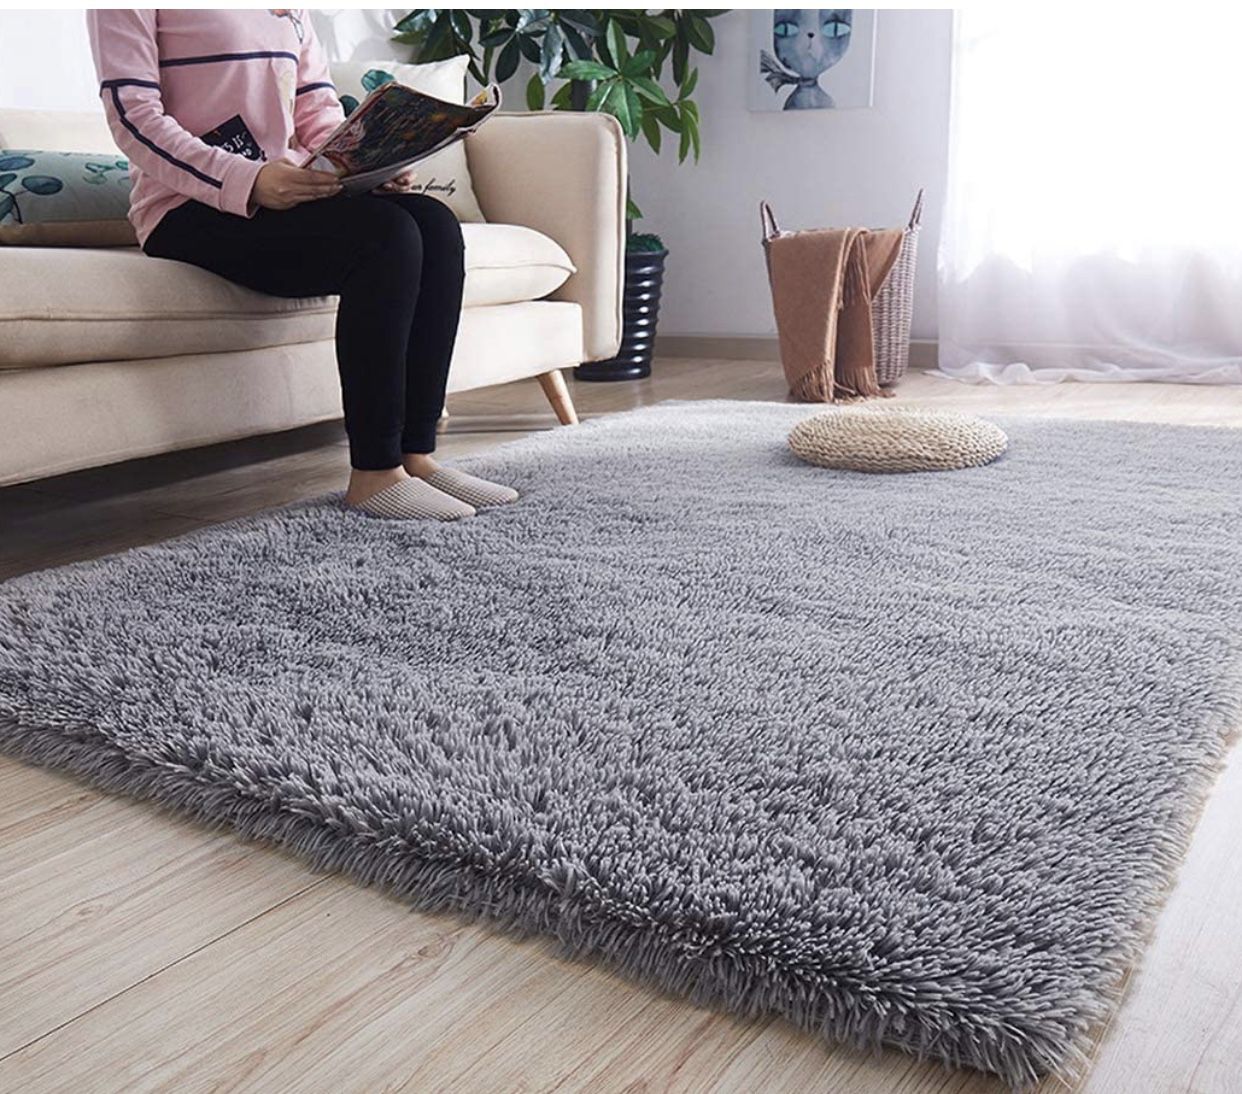 BRAND NEW | Modern Shag Area Rugs Fluffy Living Room Carpet Comfy Bedroom Home Decorate Floor Kids Playing Mat 4 Feet by 5.3 Feet, Grey